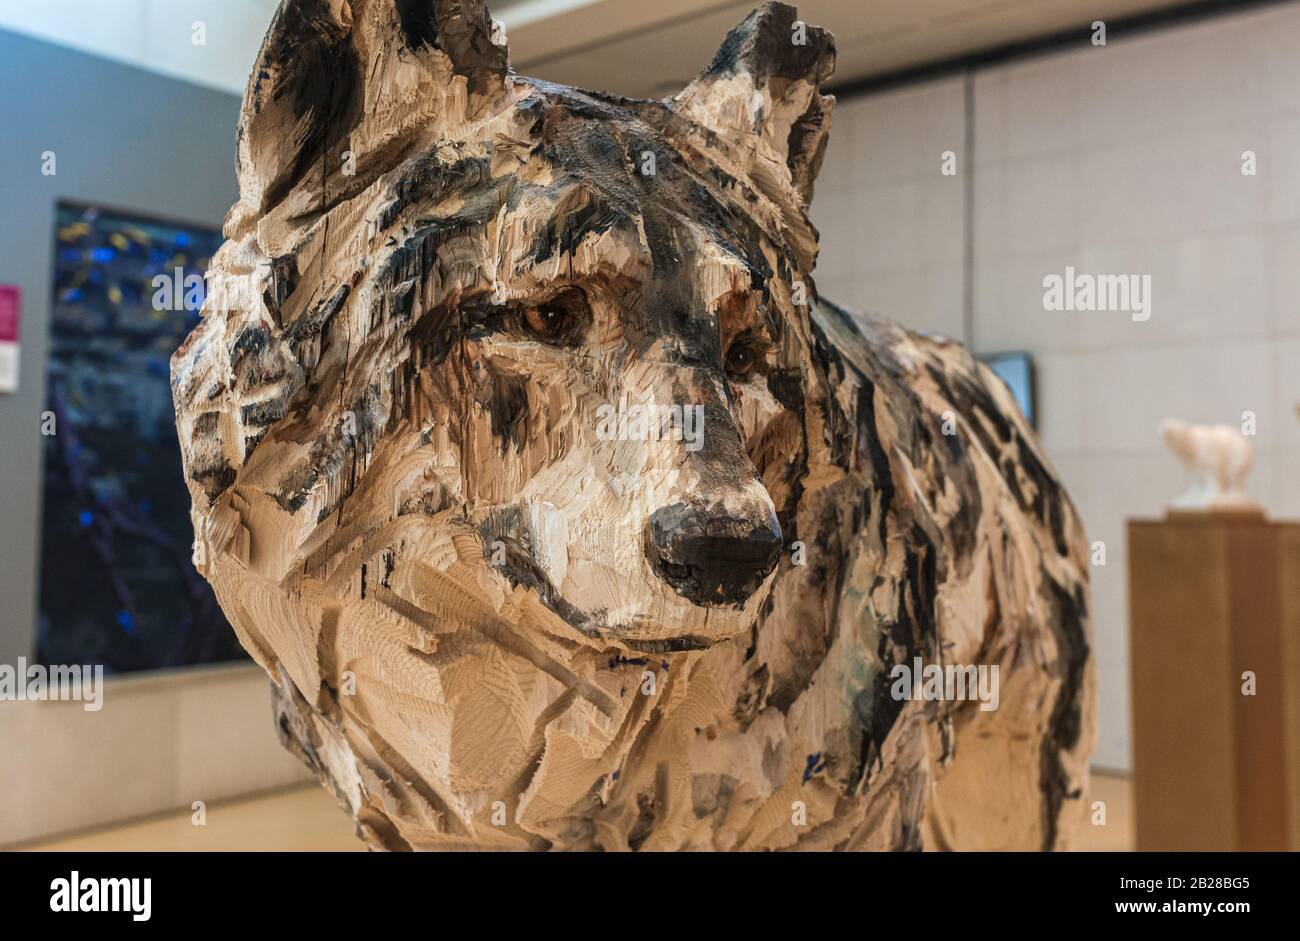 Wood Sculpture by Chainsaw Artist Jurgen Lingl Rebetez exhibited at the  interactive science museum of trento, italy, december 2019 Stock Photo -  Alamy